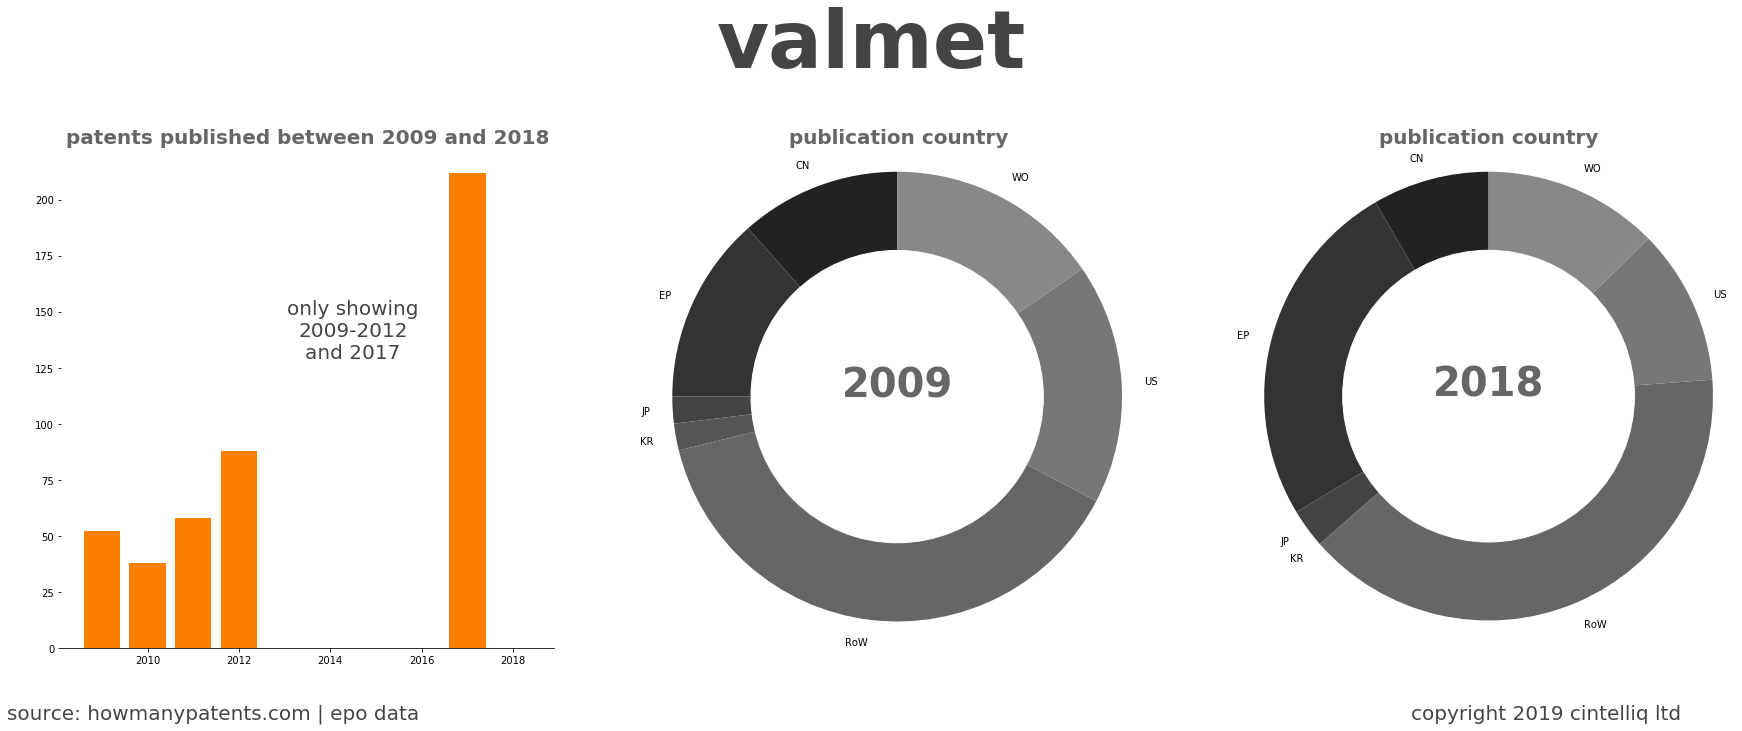 summary of patents for Valmet